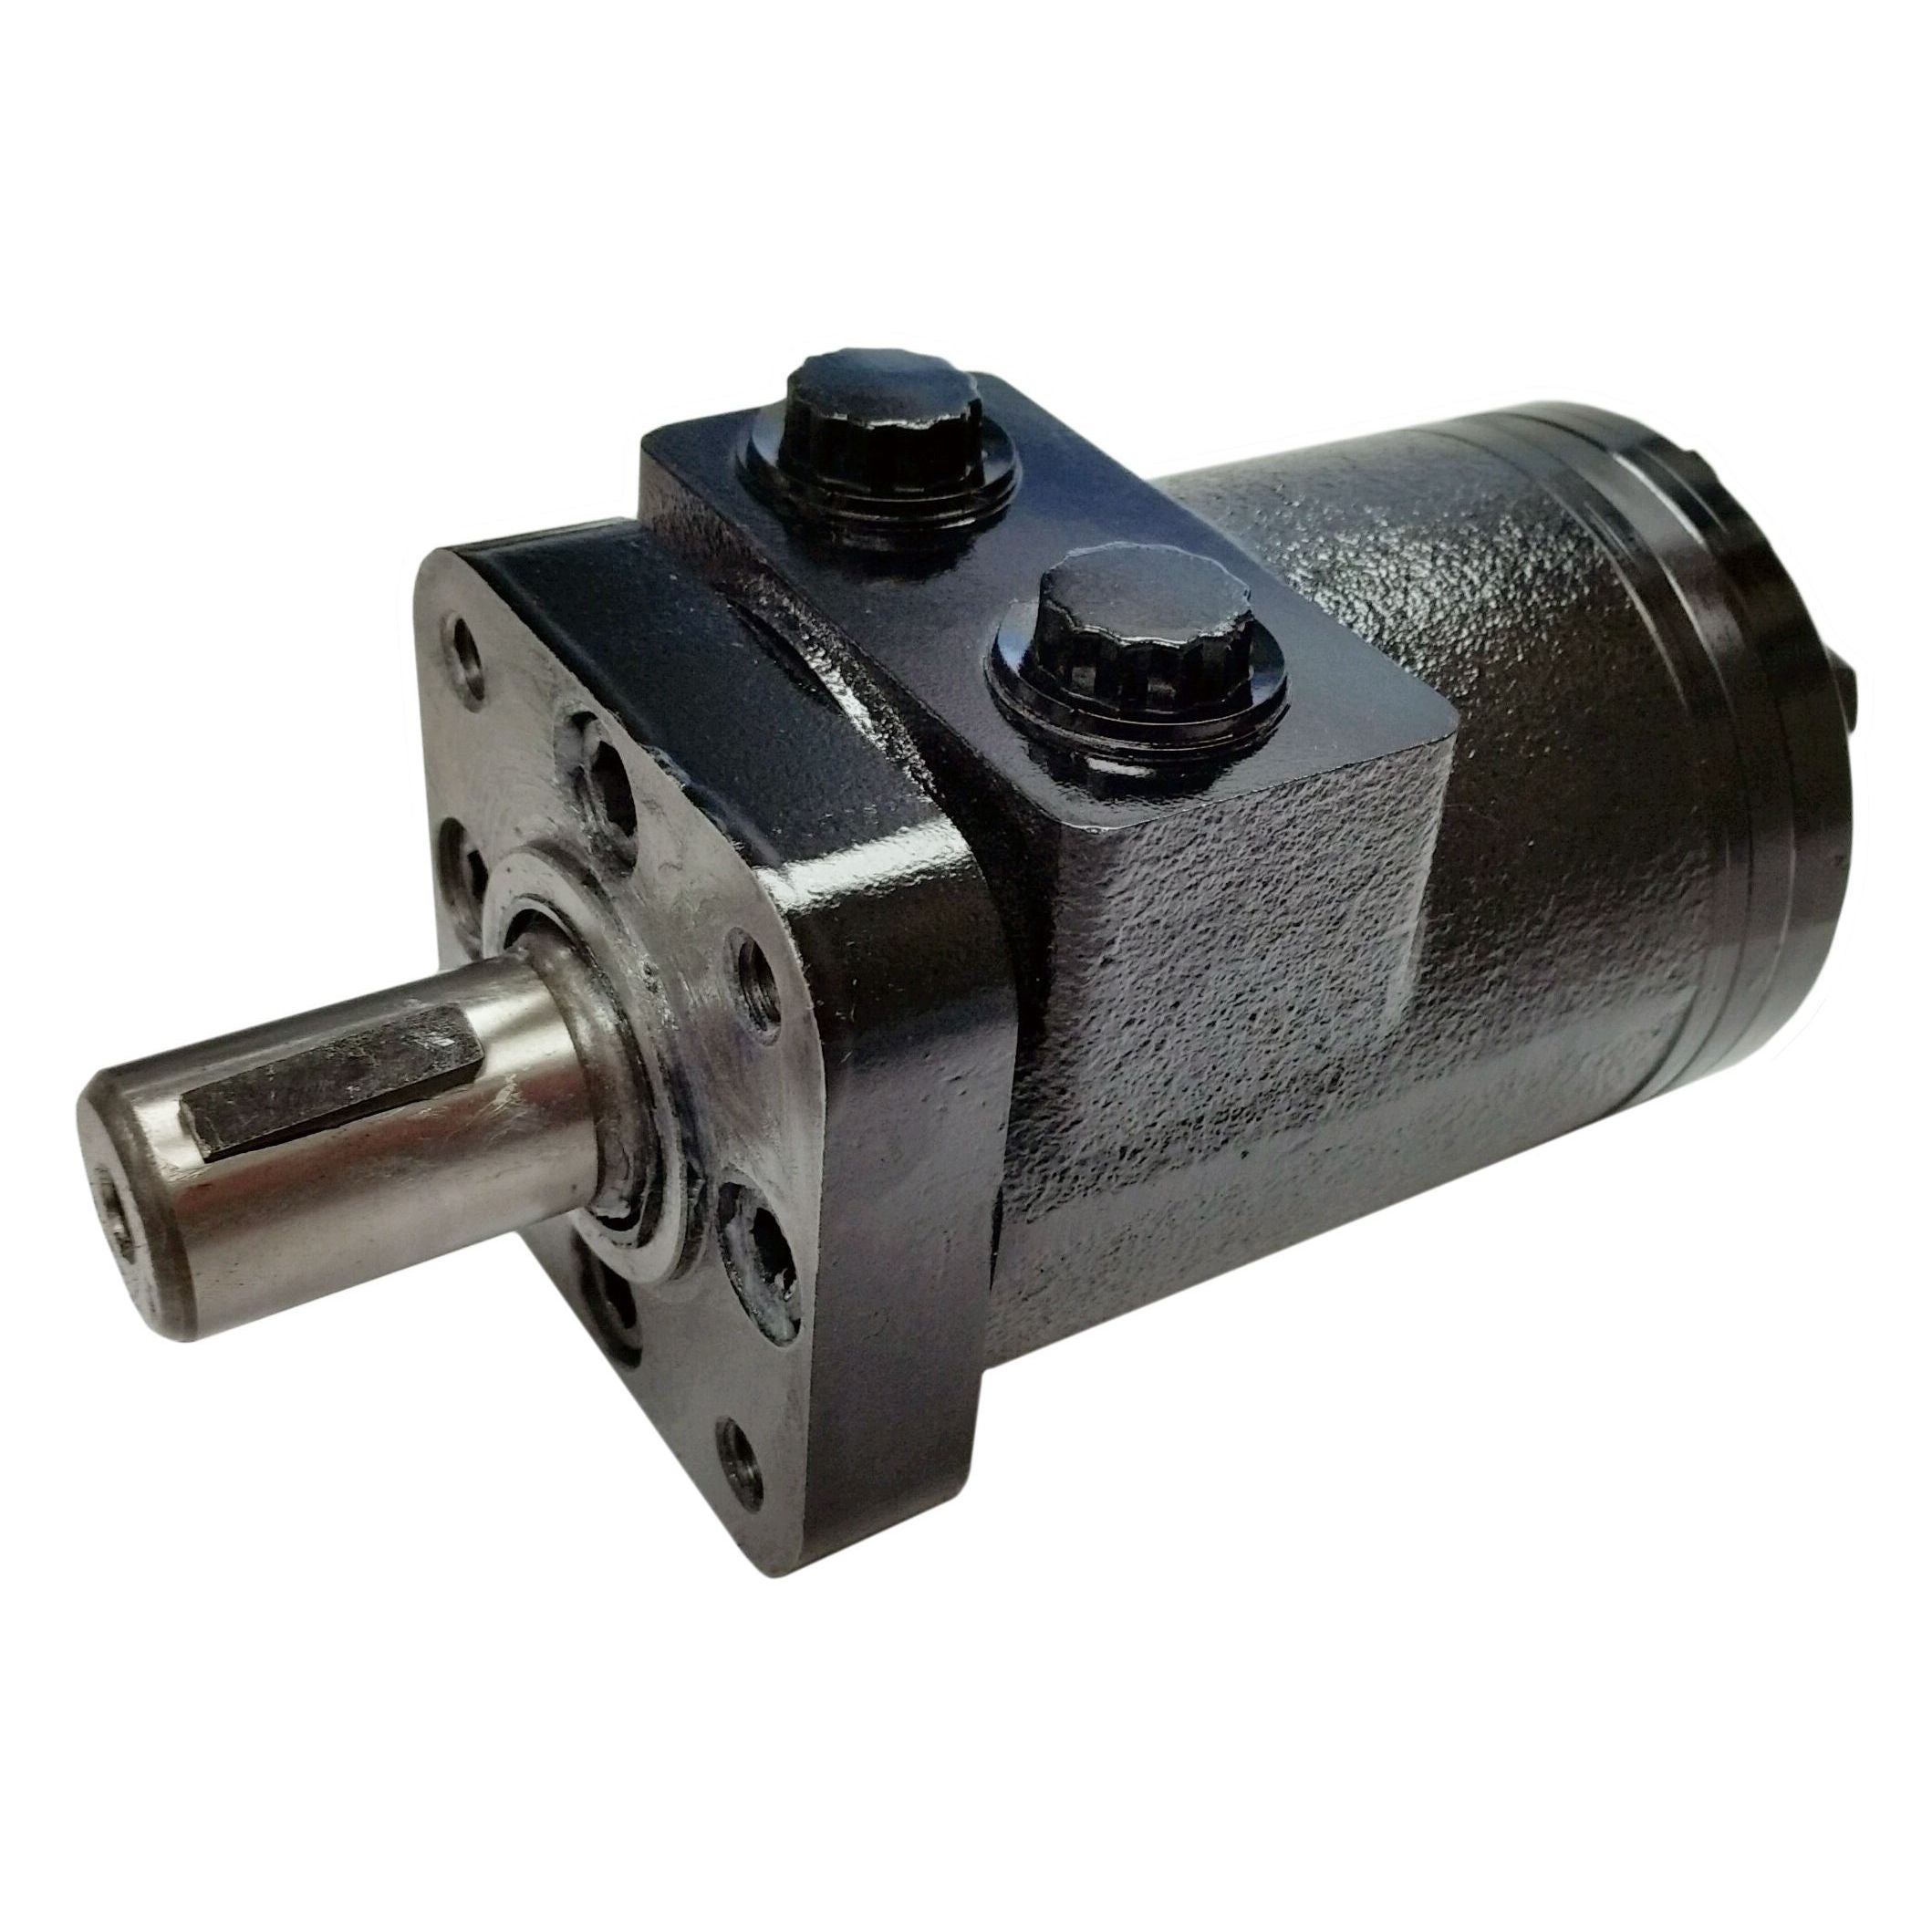 BMPH-400-H4-K-S : Dynamic LSHT Motor, 390cc, 155RPM, 3186in-lb, 1450psi Differential, 15.85GPM, SAE A 4-Bolt Mount, 1" Bore x 1/4" Key Shaft, Side Ported, #10 SAE (5/8")